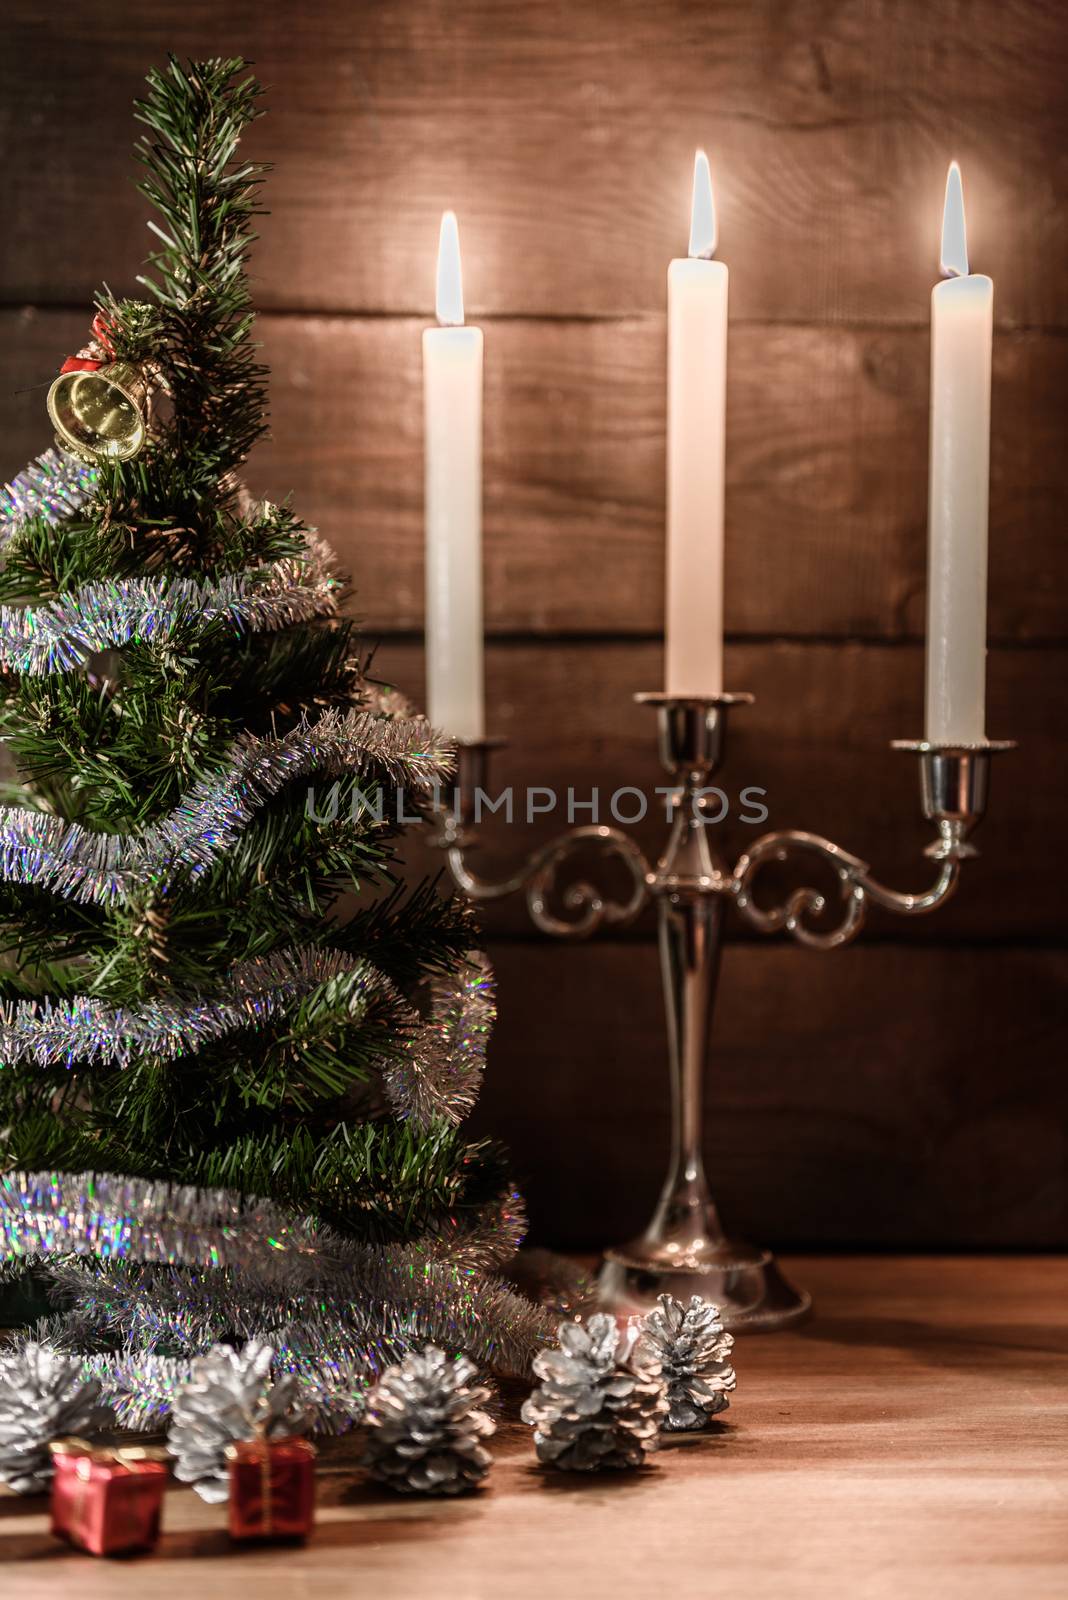 Christmas decorative tree is adorned with rain stands on the table with lit candles